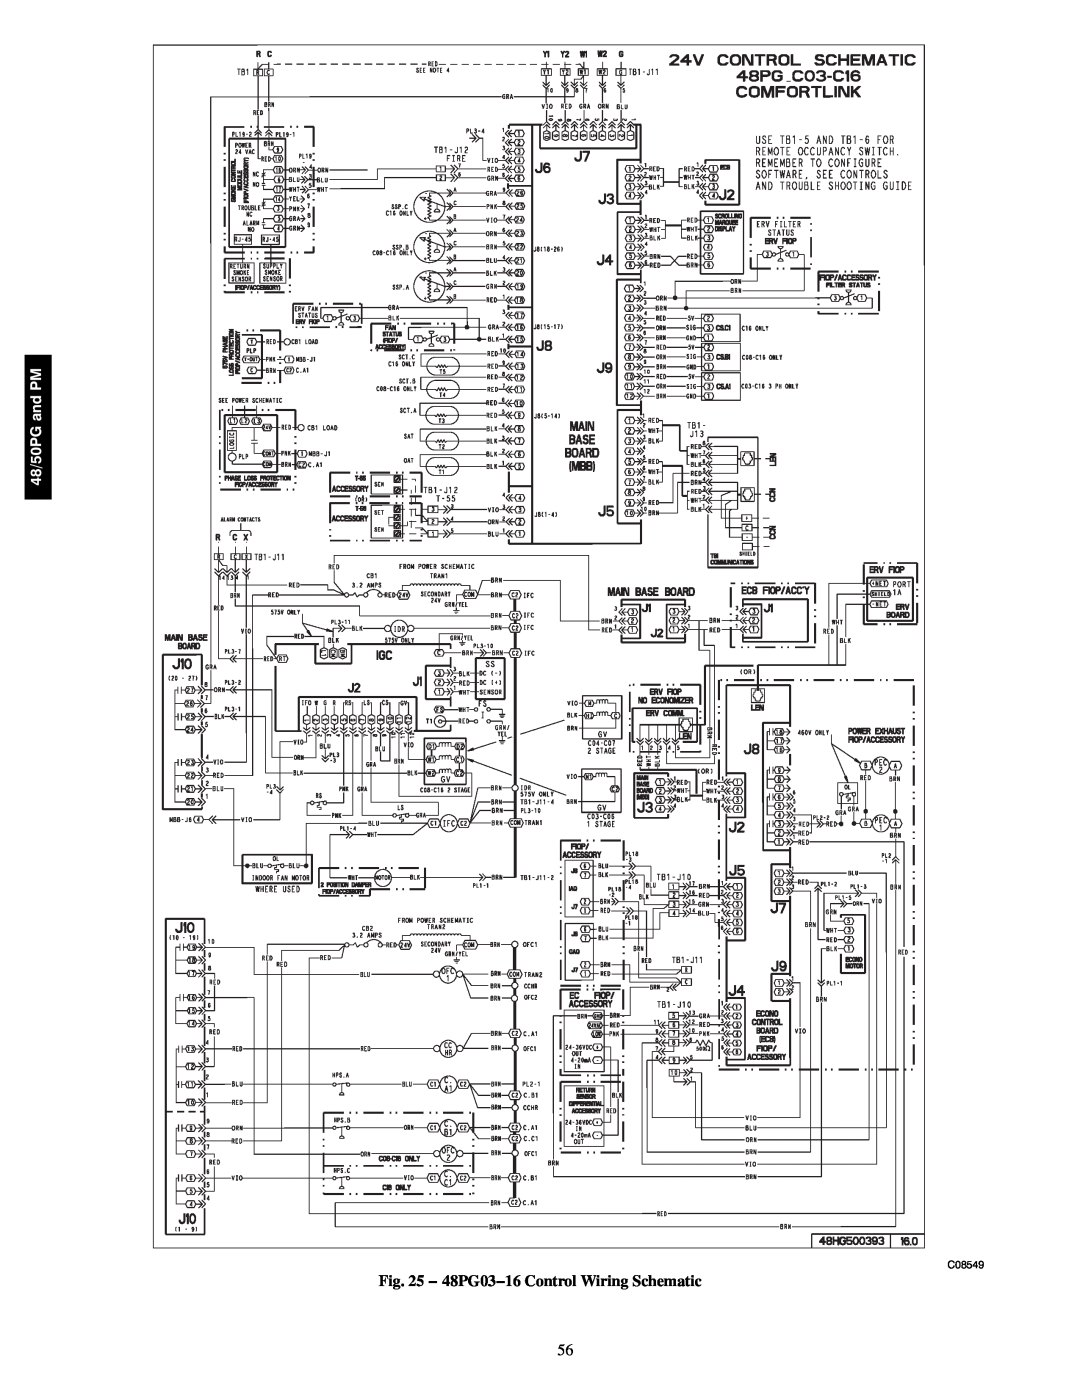 Carrier 48/50PG C03-14, 48/50PM C16-28 manual 48PG03−16 Control Wiring Schematic, 48/50PG and PM, C08549 